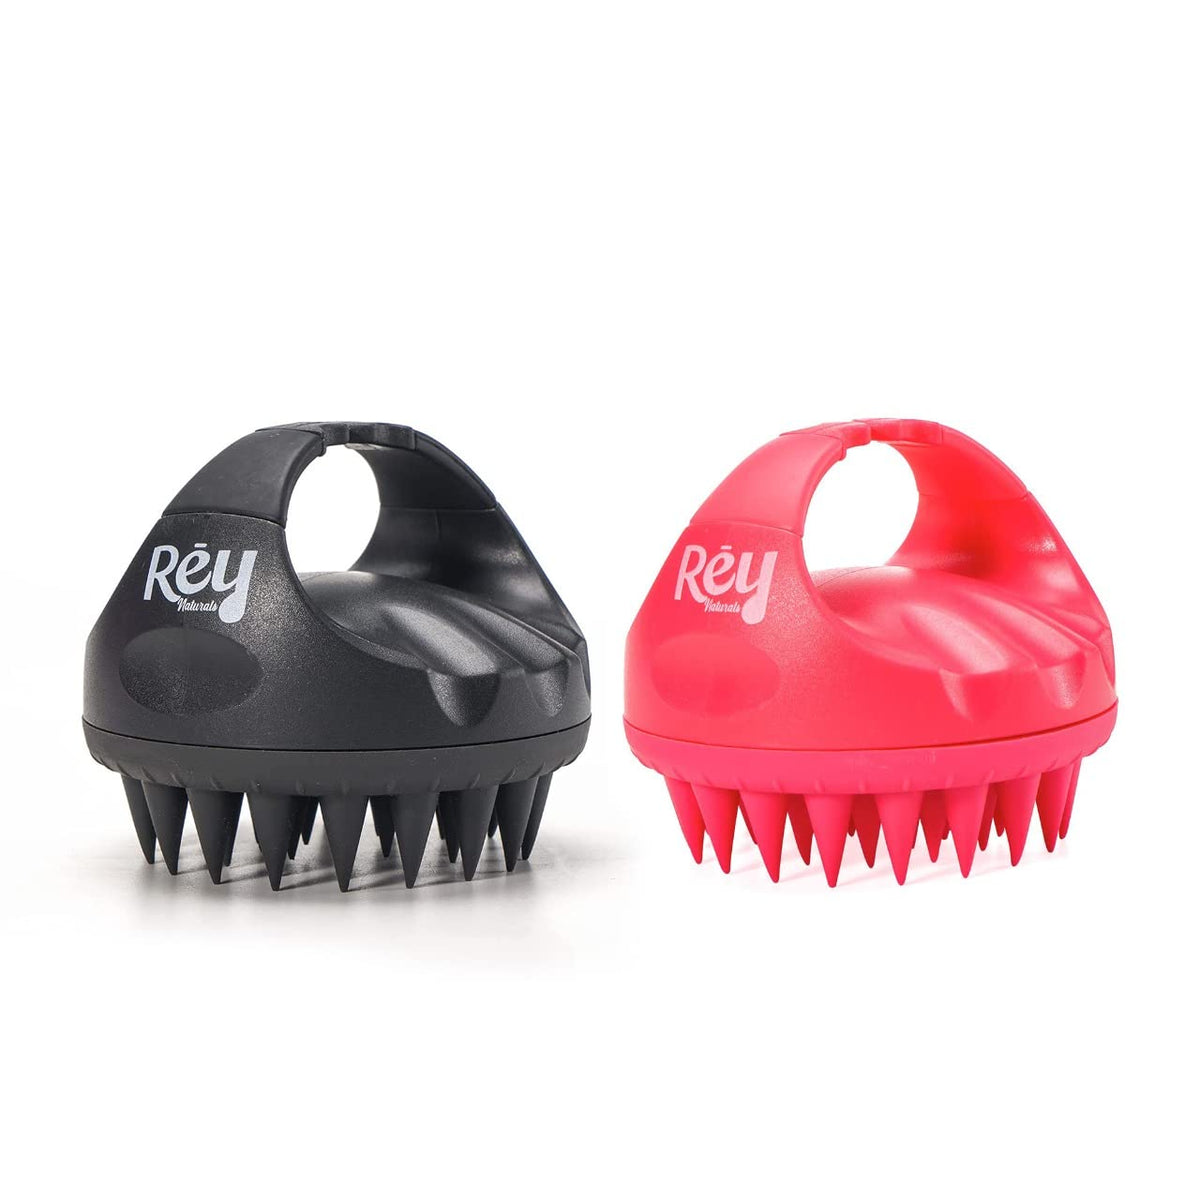 Rey Naturals Hair Scalp Massager Shampoo Brush - Hair Growth, Scalp Care, and Relaxation - Soft Bristles for Gentle Massage - Pink Color (Red & Black)